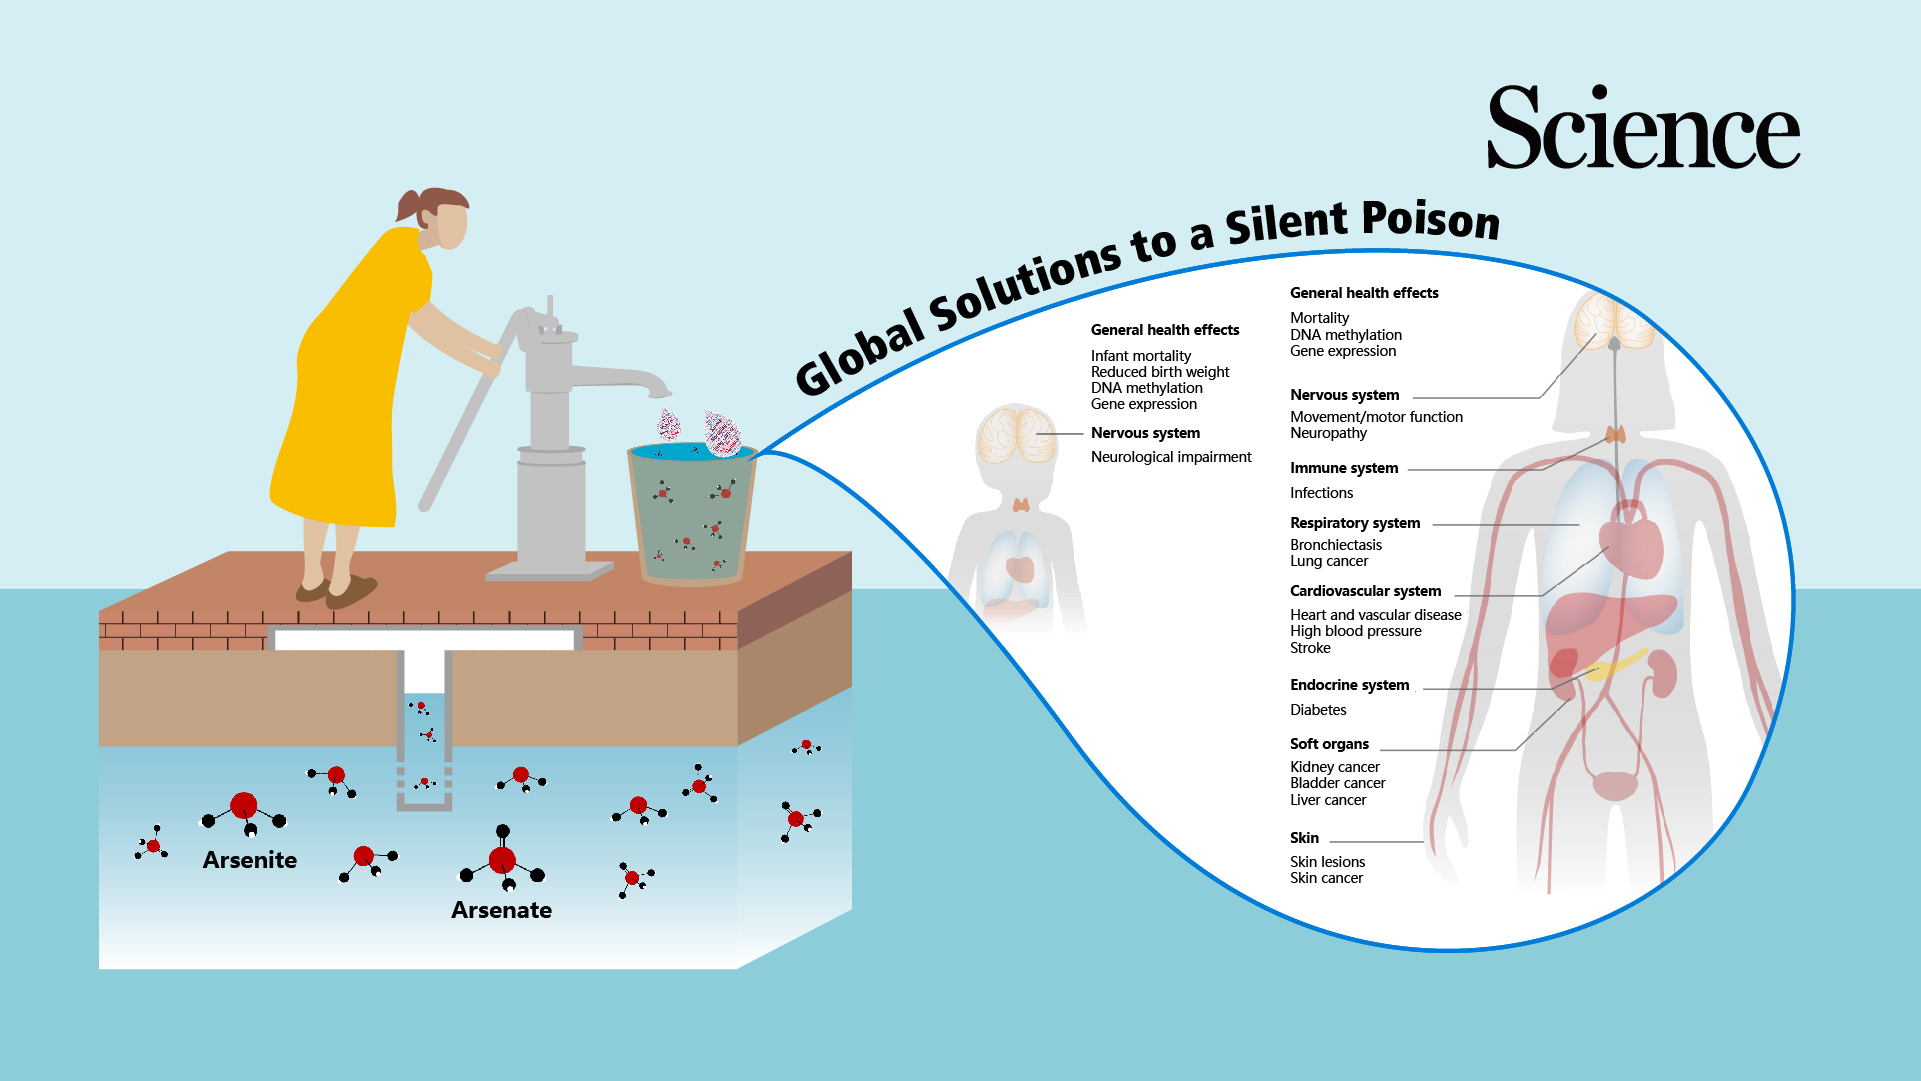 SUSTech environmental scientist offers perspective on ending arsenic exposure from well water